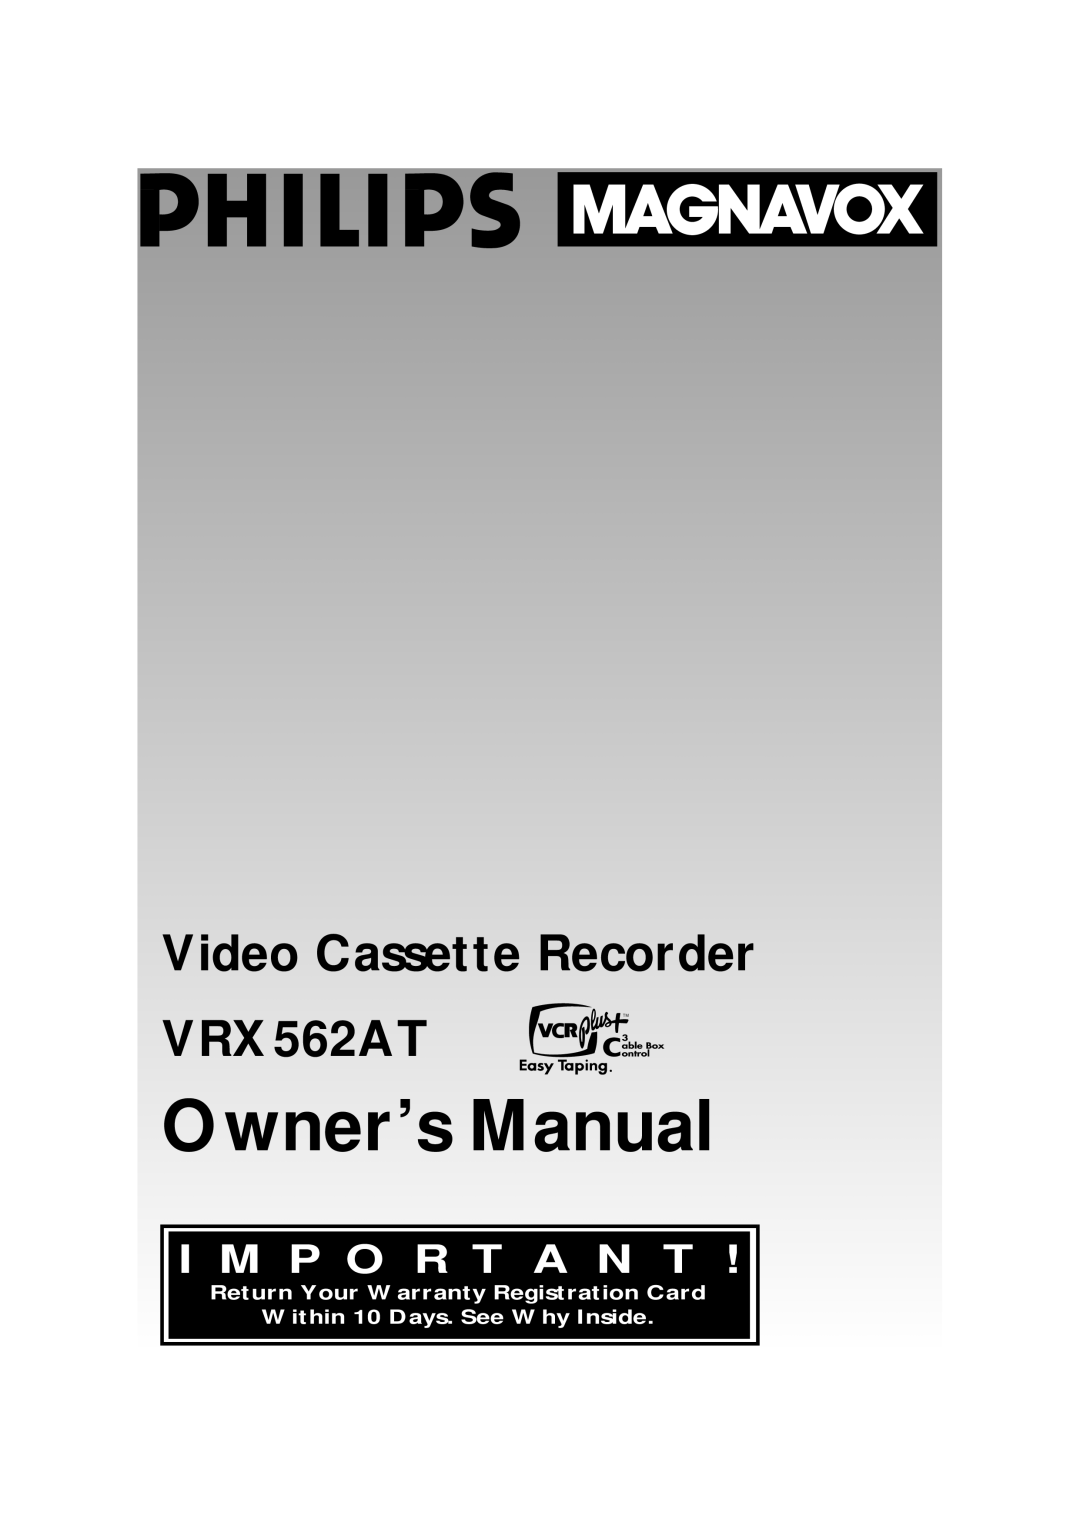 Philips VRX562AT warranty Owner’s Manual, Video Cassette Recorder, I M P O R T A N T 